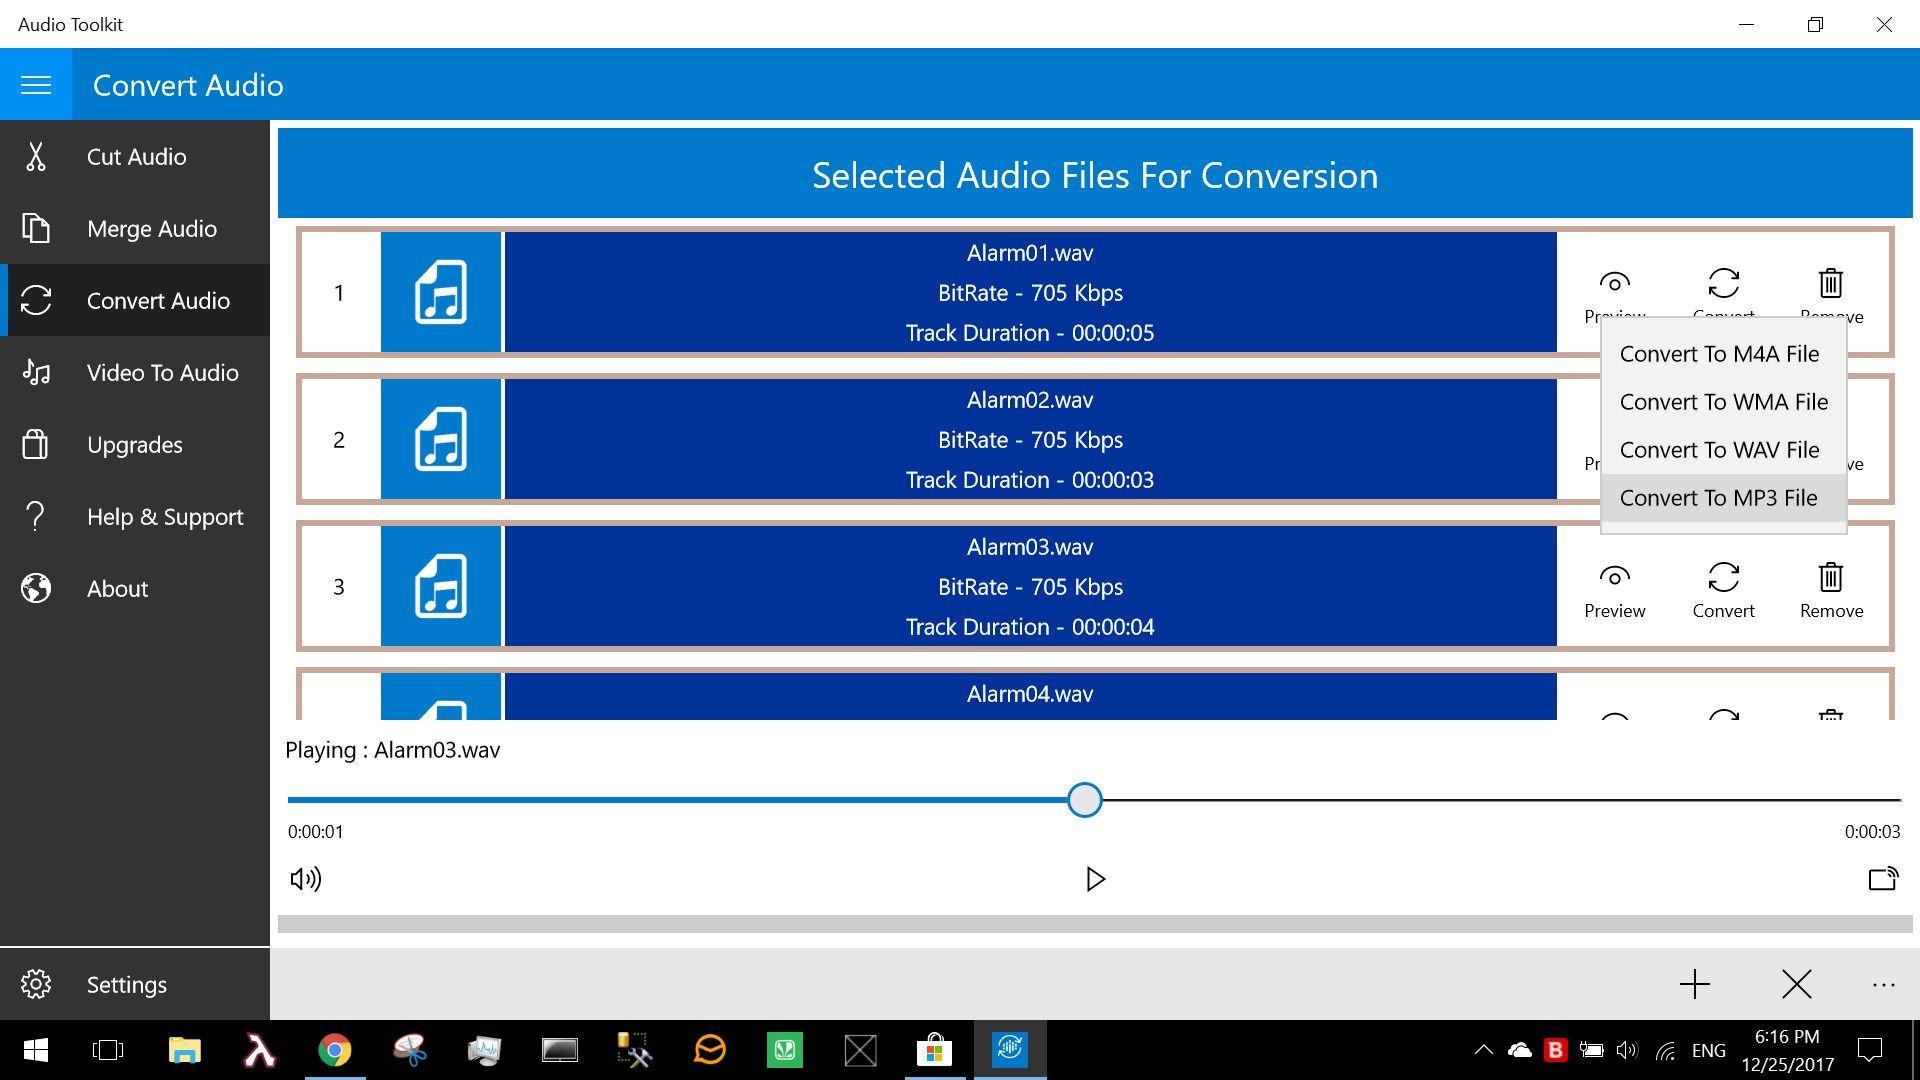 Covert audio to MP3 & different other formats with preview on demand!